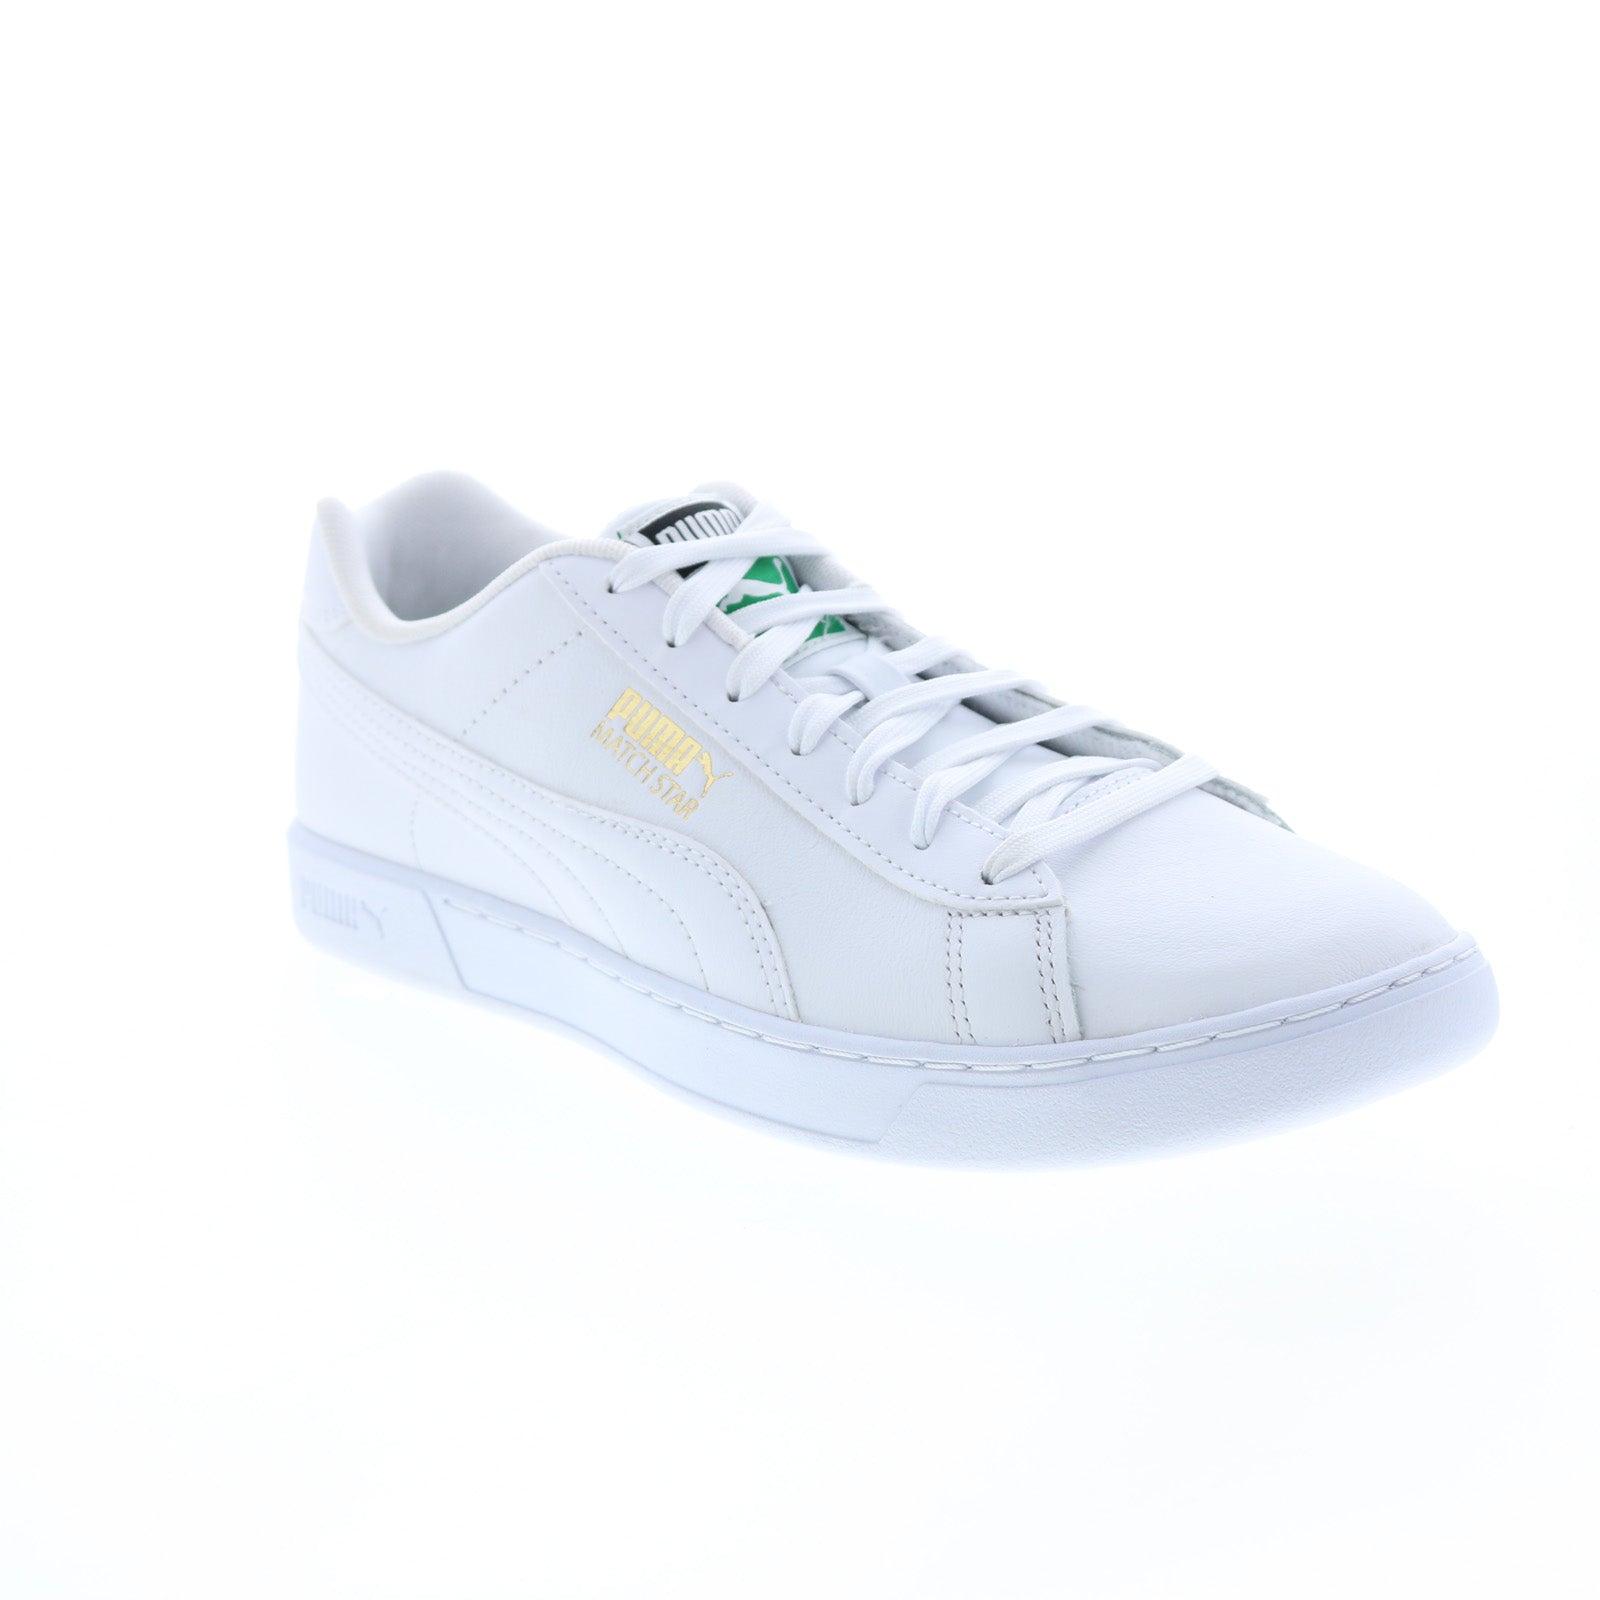 Lief noorden natuurpark Puma Match Star 38020401 Mens White Leather Lifestyle Sneakers Shoes - Ruze  Shoes